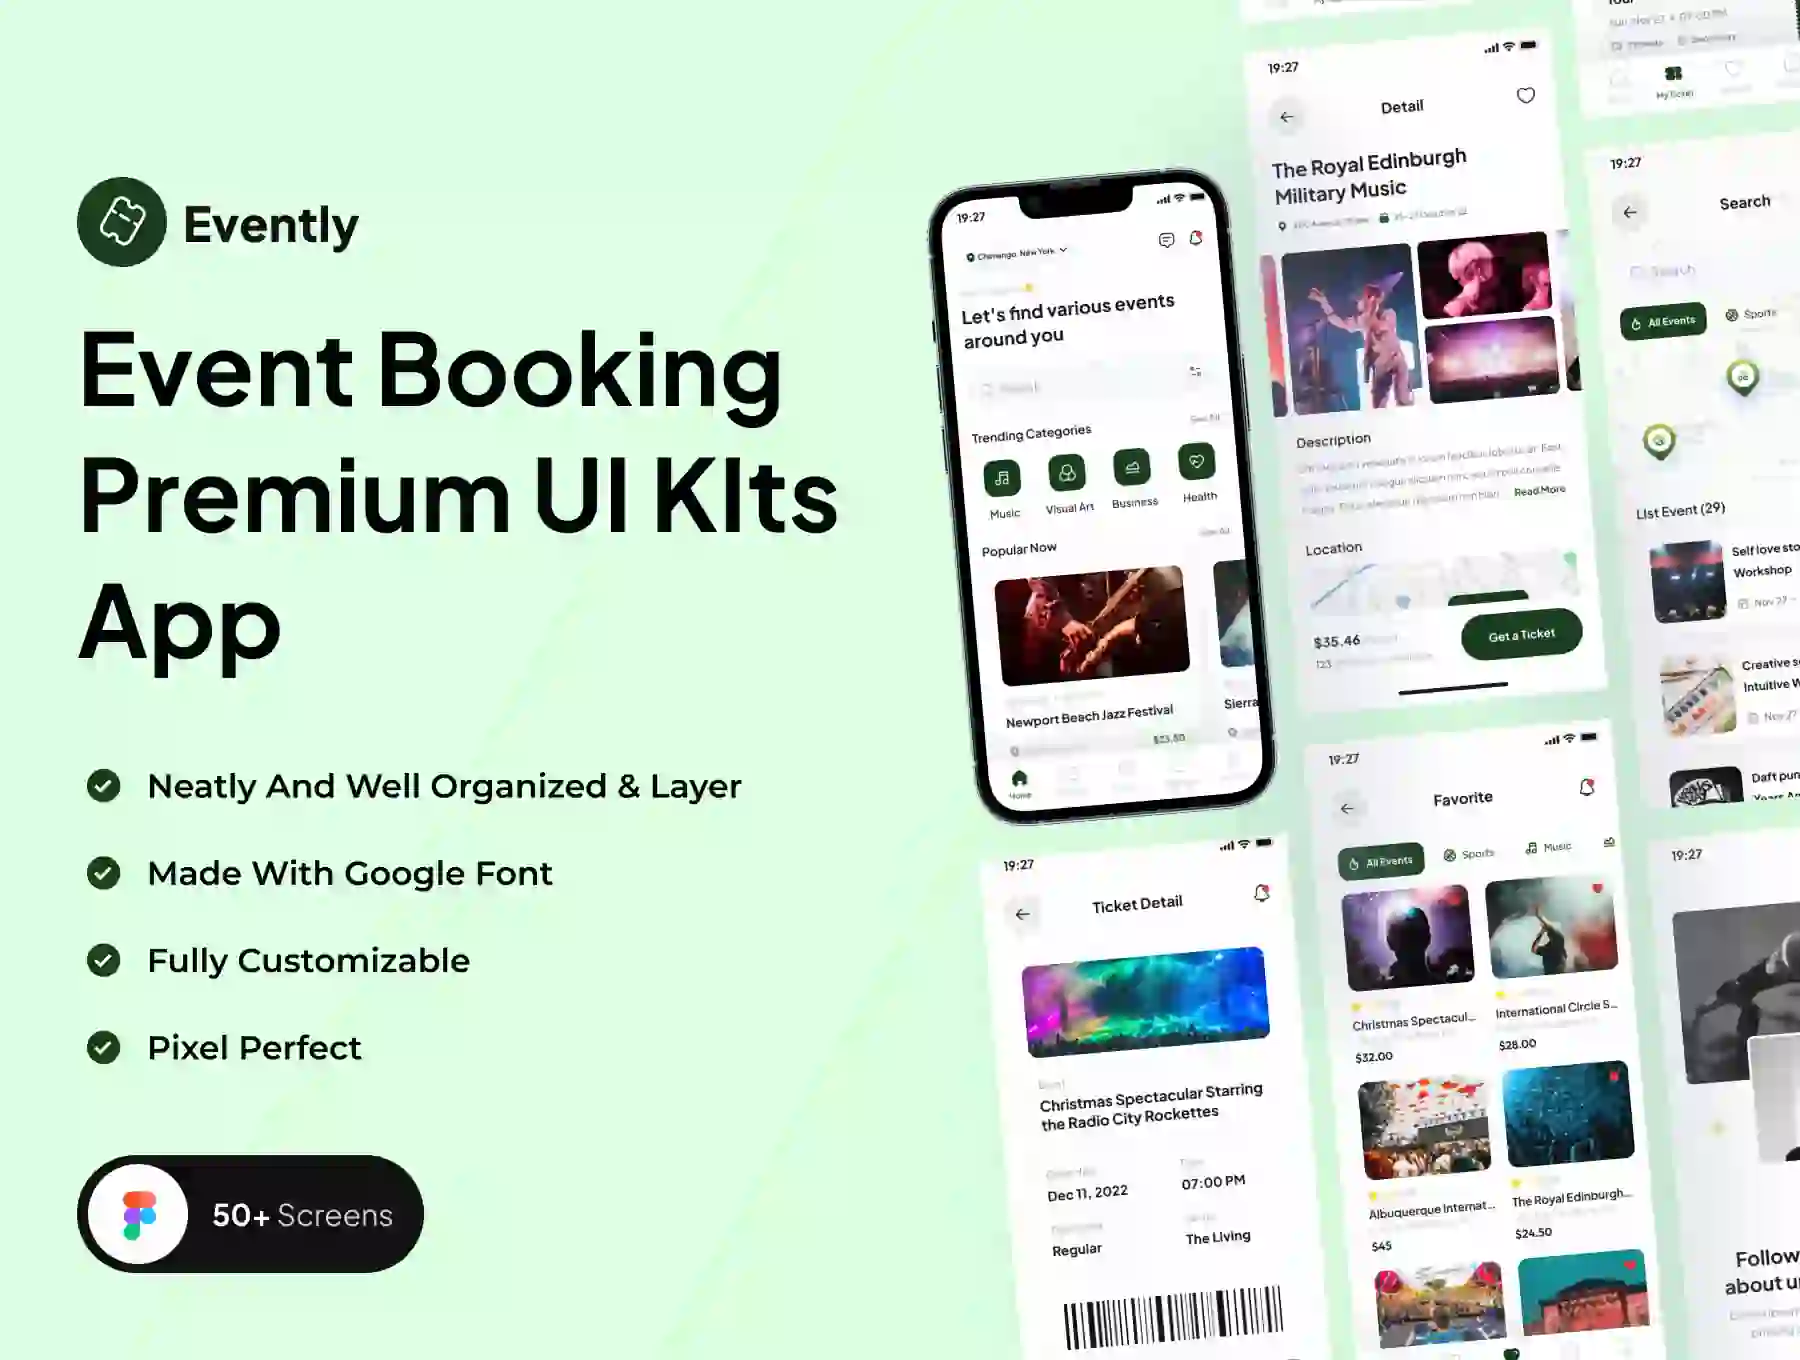 Evently - Event Booking Premium UI KIts App